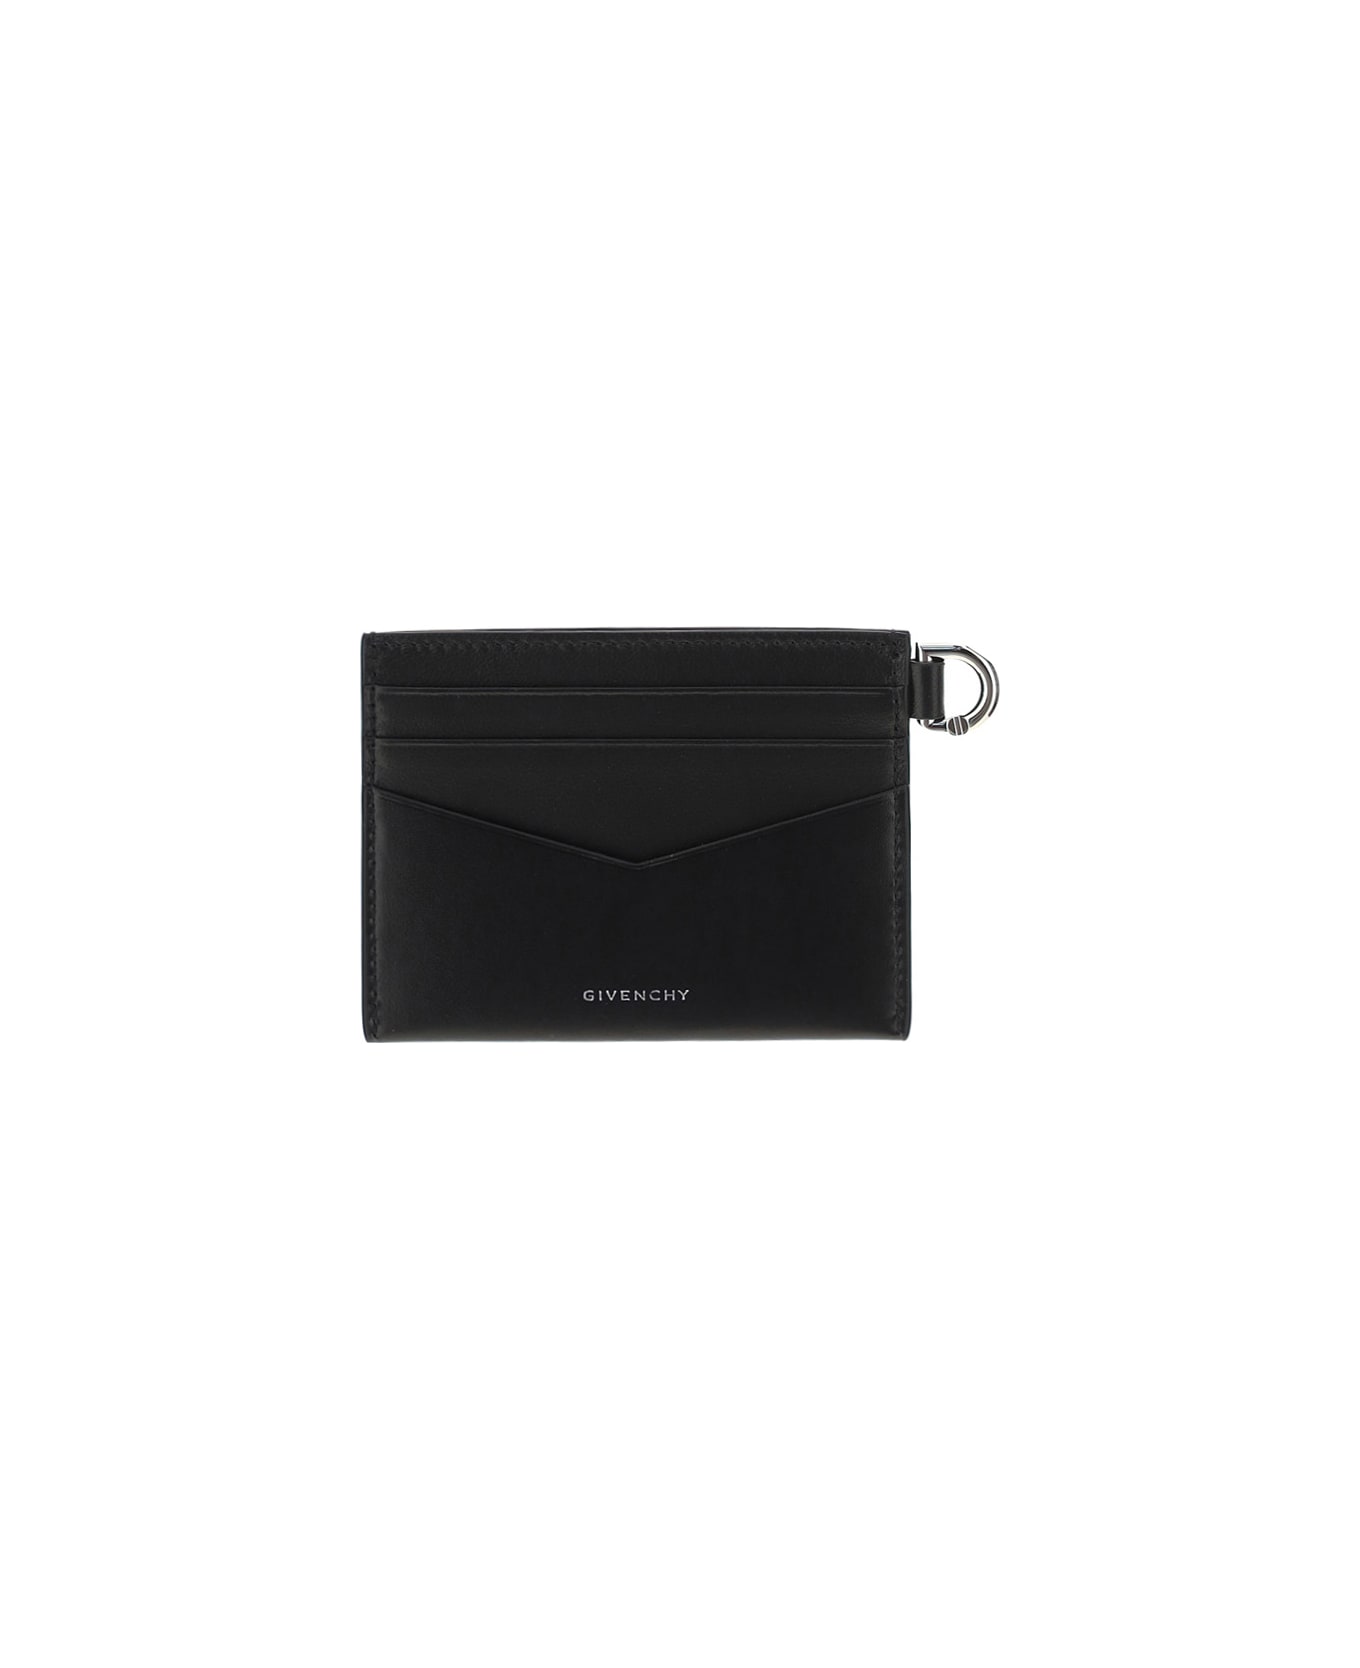 Givenchy Cards Case - Black